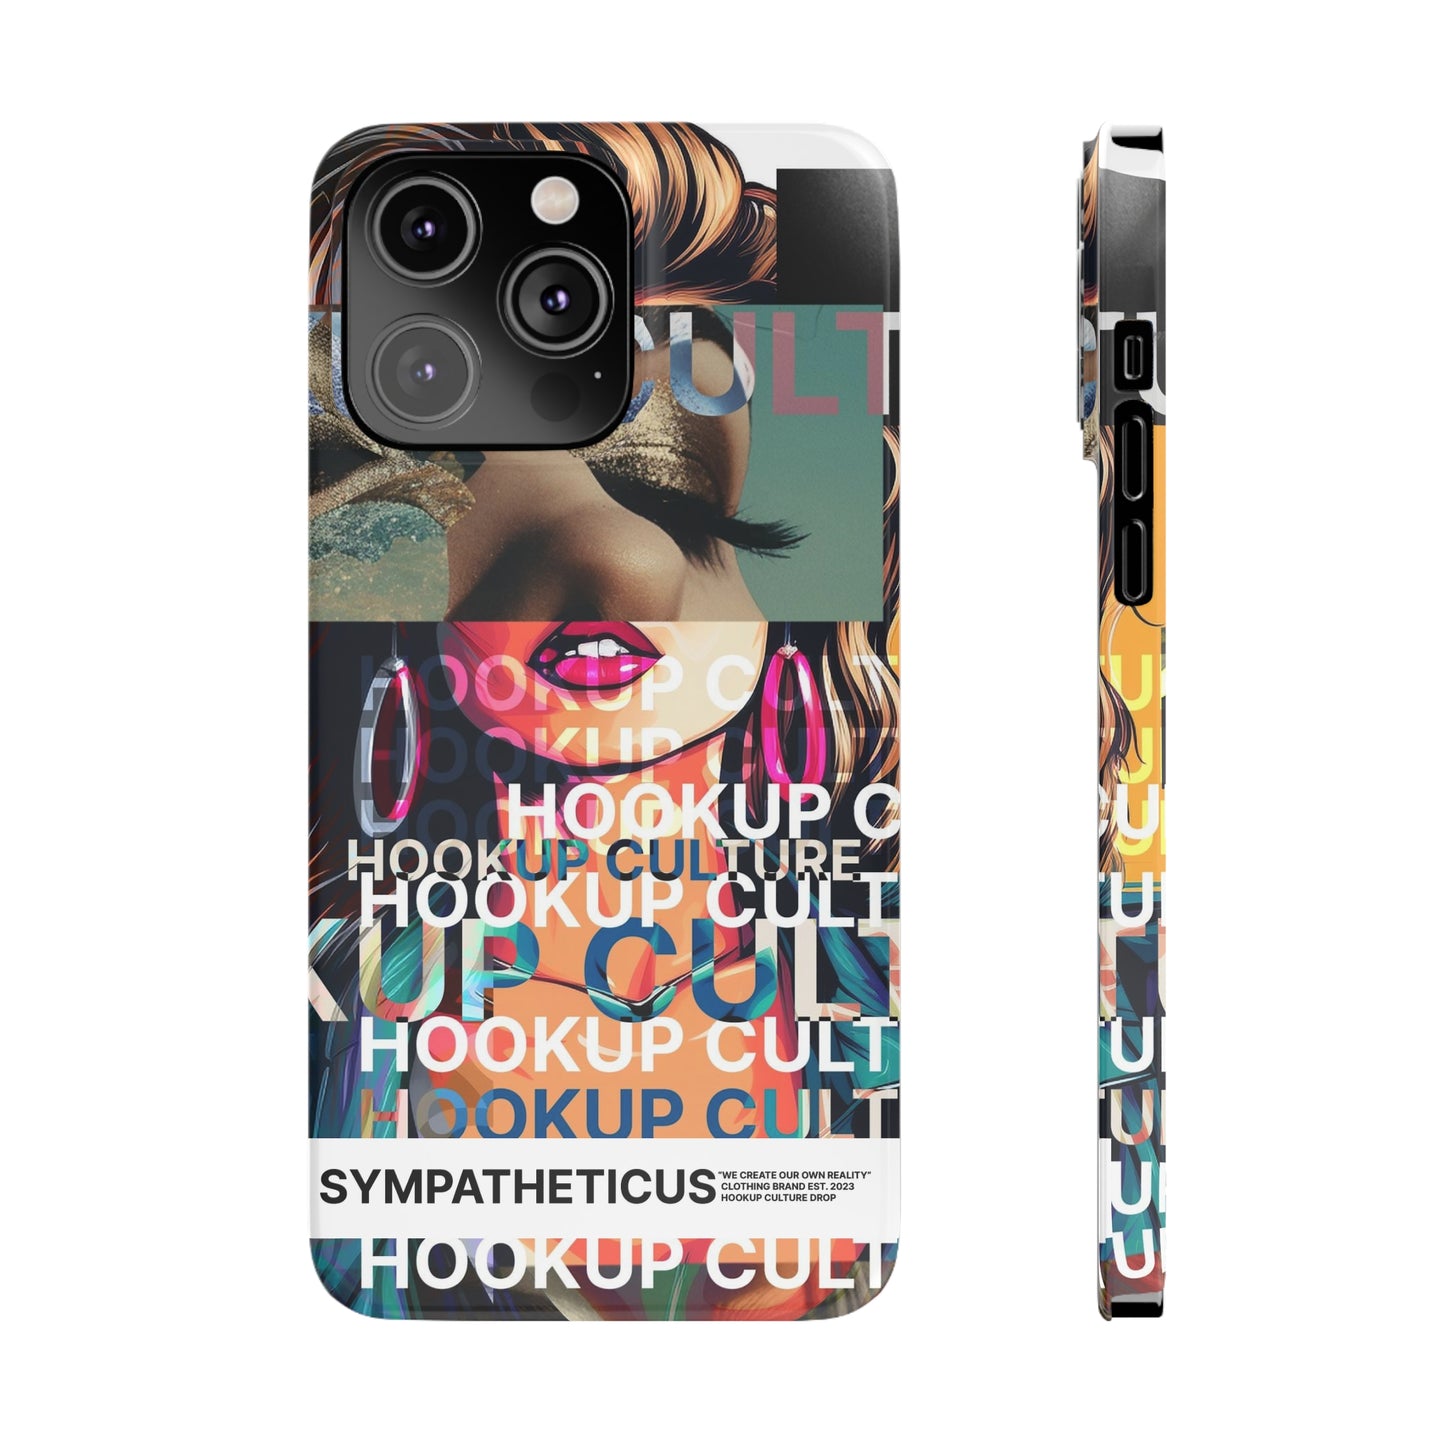 Hookup culture special iphone case-03